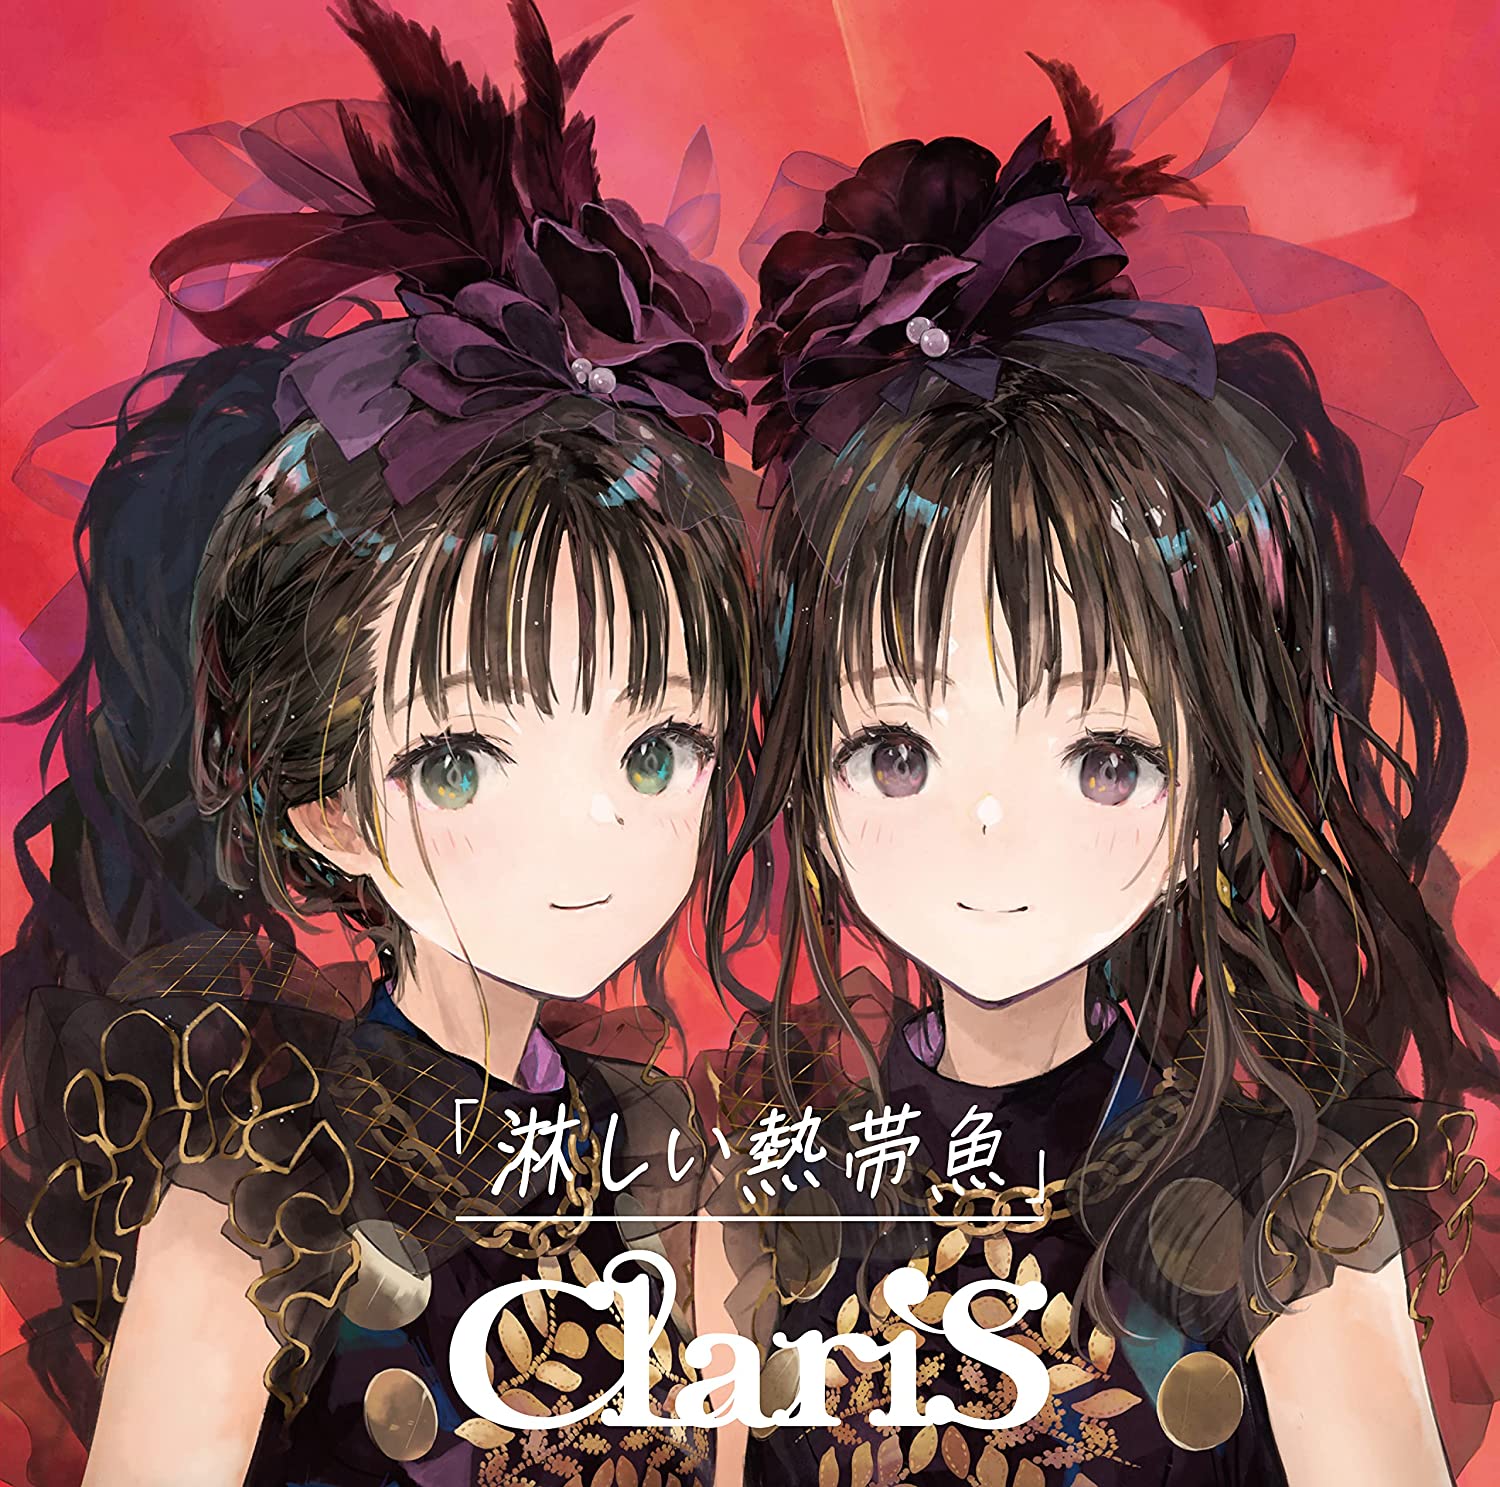 ClariS／淋しい熱帯魚 (通常盤) (CD) VVCL-2284 2023/6/21発売 クラリス